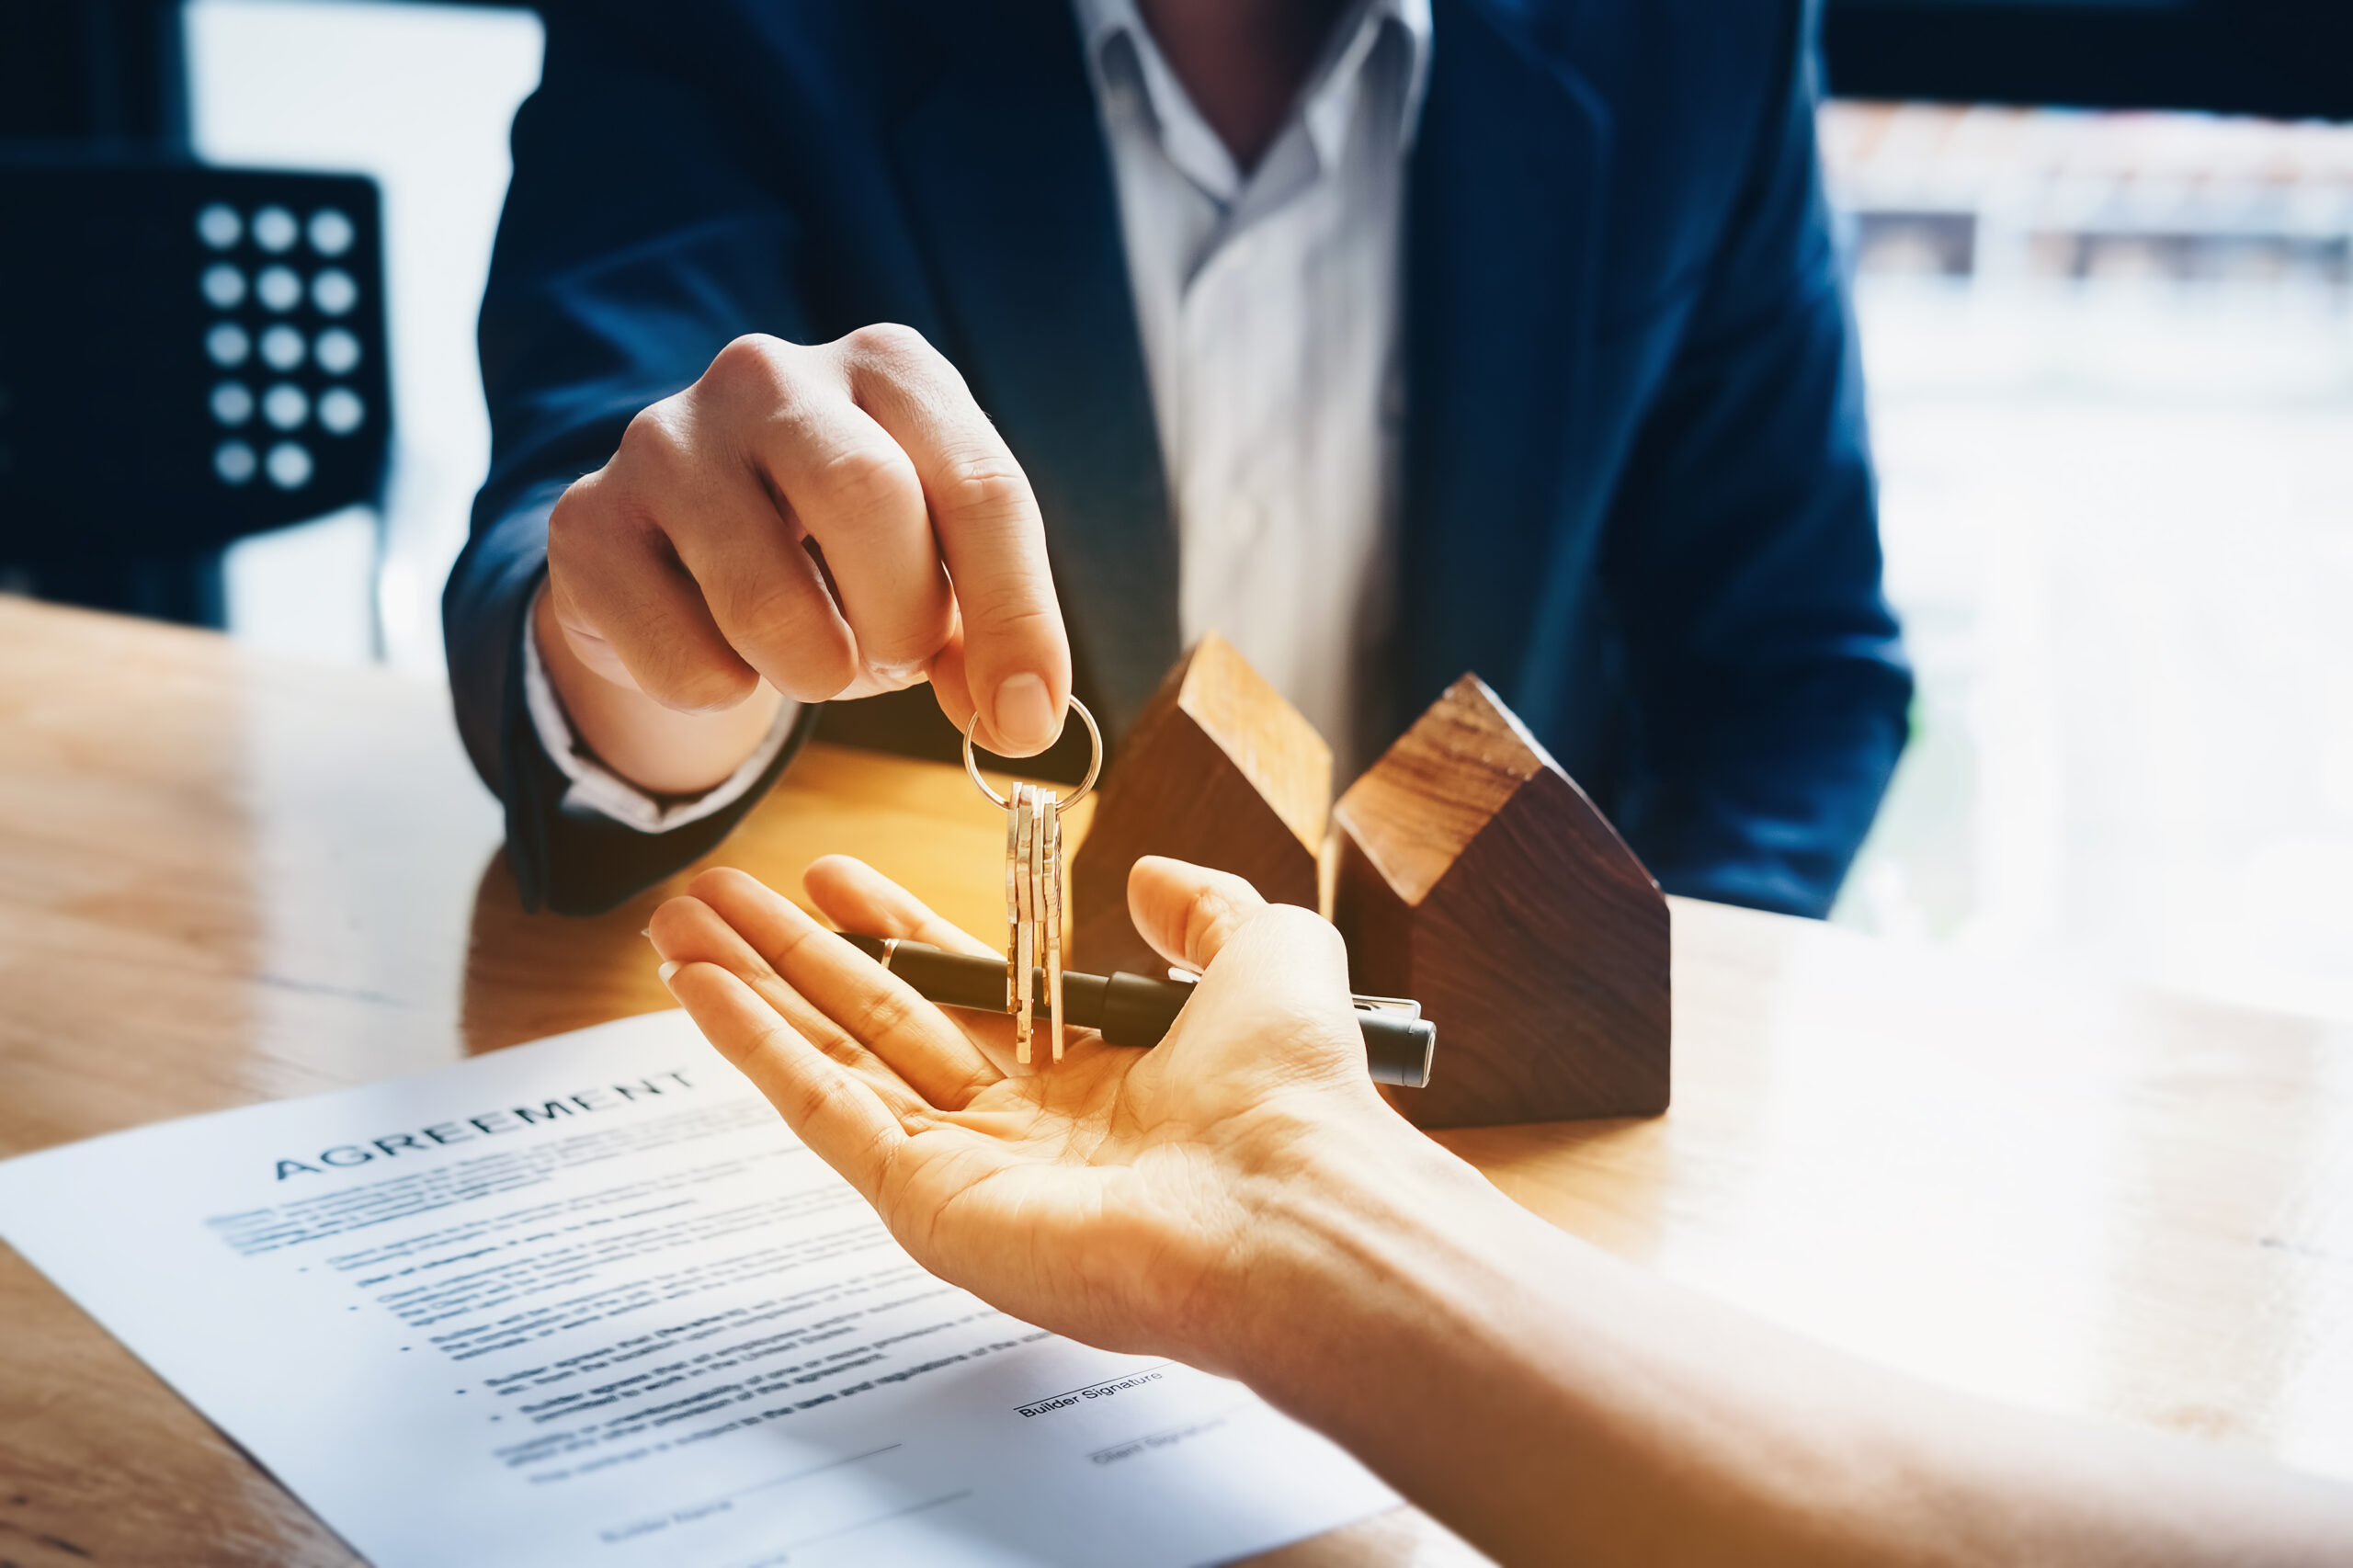 Real estate agents agree to buy a home and give keys to clients